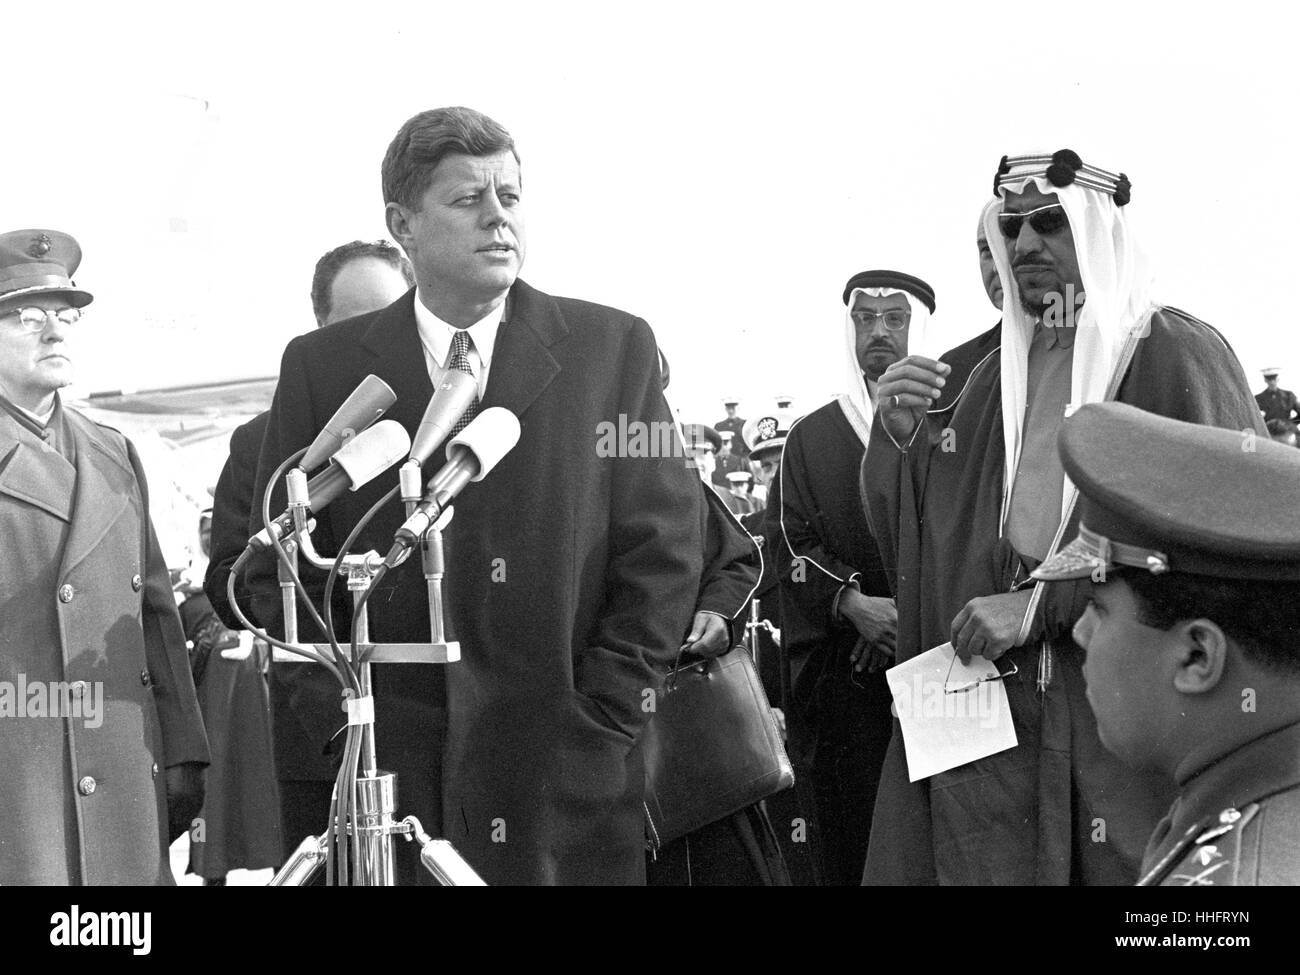 United States President John F. Kennedy welcomes a delegation led by King Saud bin Abdulaziz Al Saud of Saudi Arabia during a ceremony at Andrews Air Force Base, Maryland on February 13, 1962. Credit: Arnie Sachs / CNP - NO WIRE SERVICE - Photo: Arnie Sachs/Consolidated/dpa Stock Photo